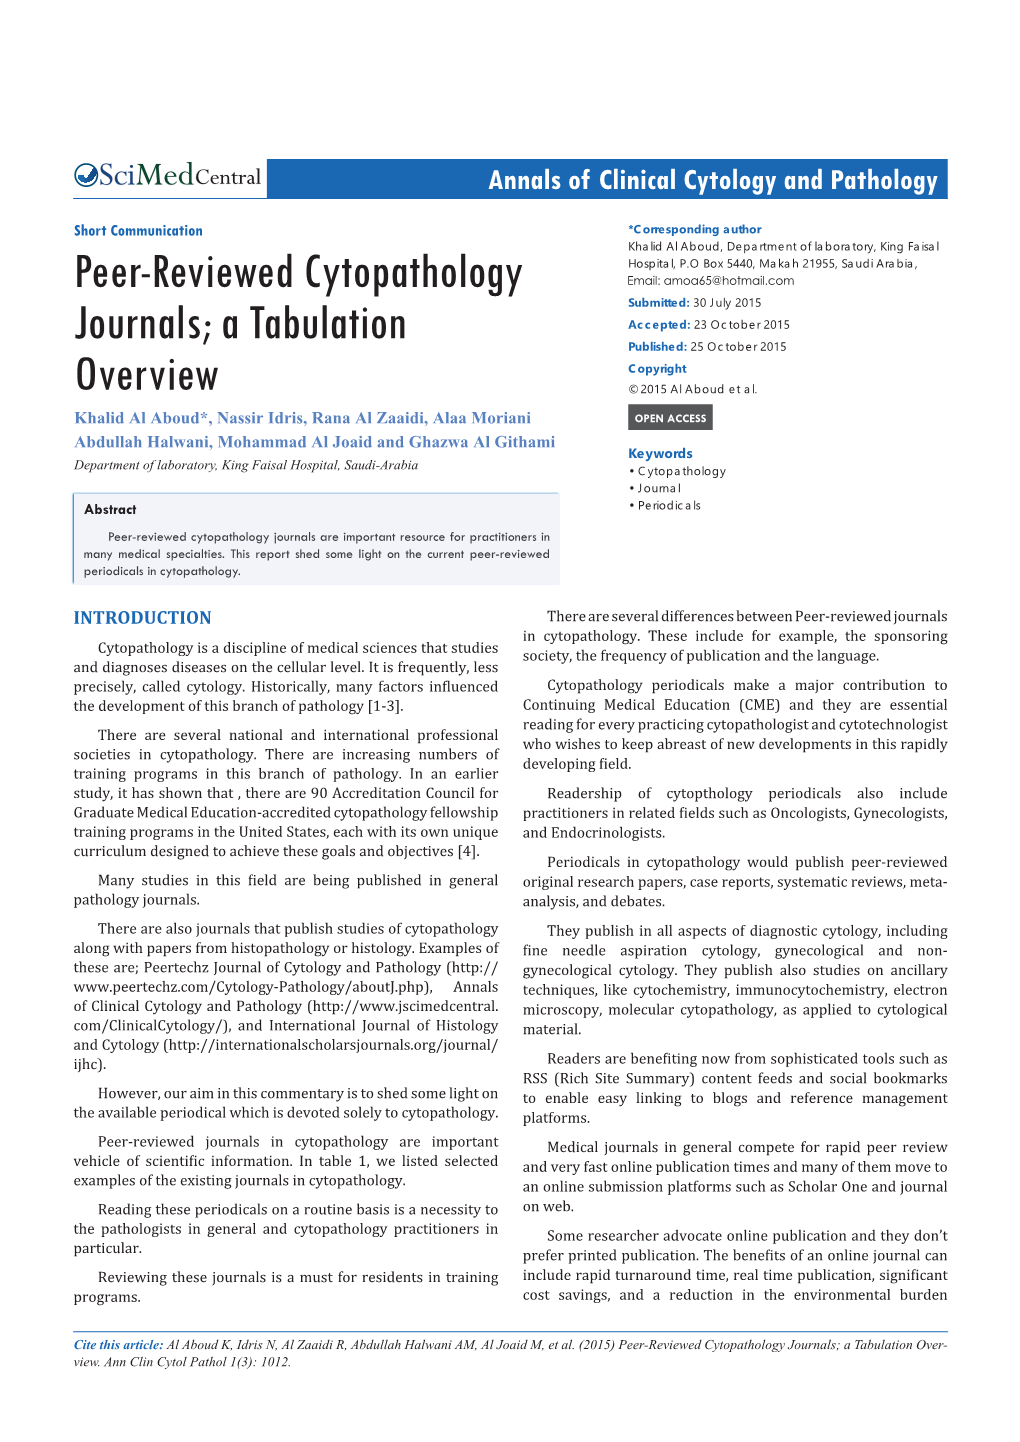 Peer-Reviewed Cytopathology Journals Are Important Resource for Practitioners in Many Medical Specialties